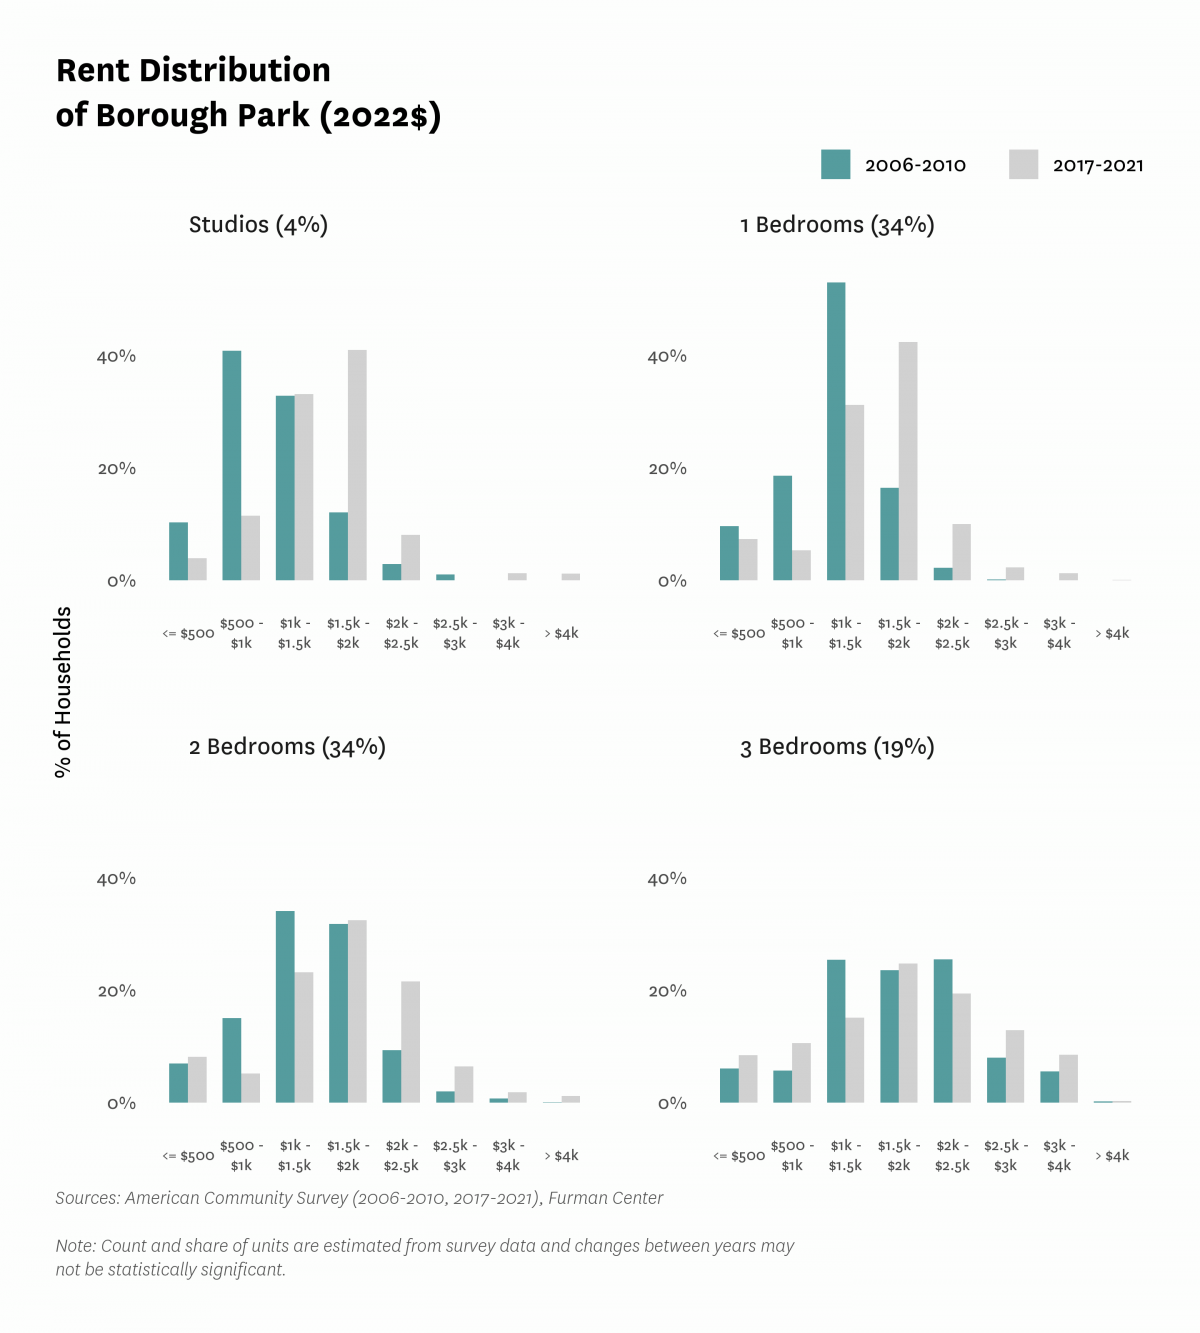 Graph showing the distribution of rents in Borough Park in both 2010 and 2017-2021.